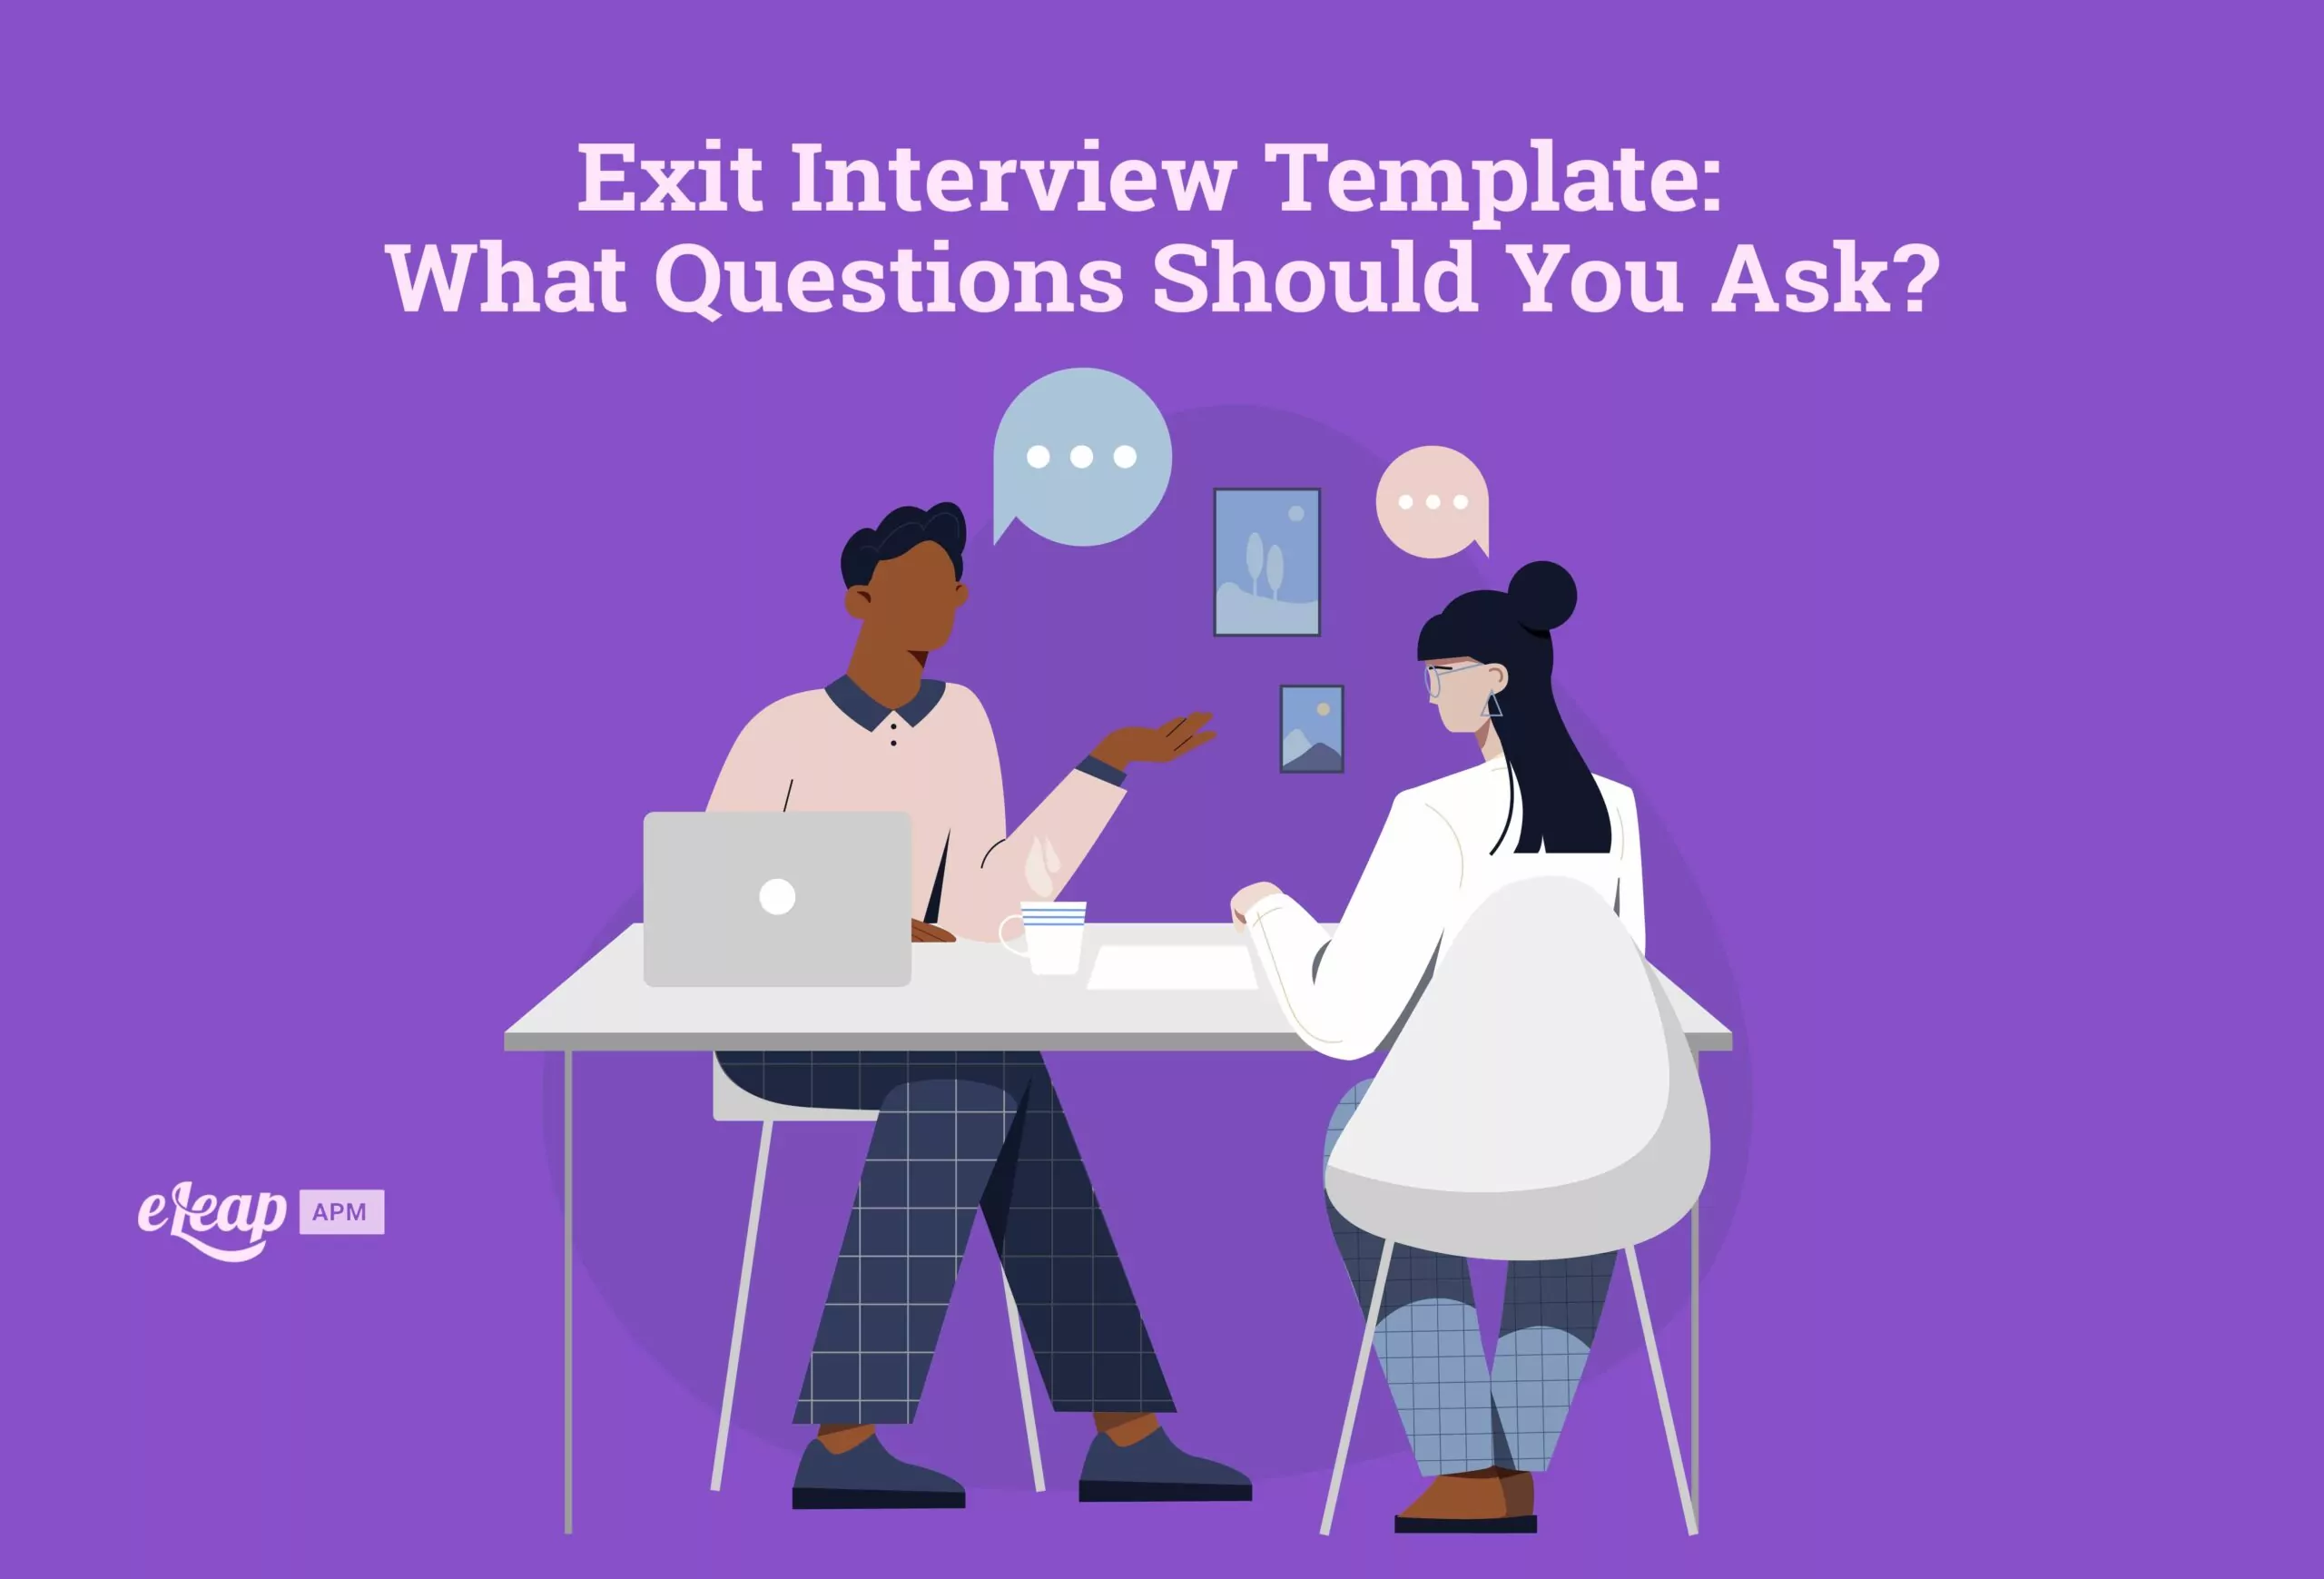 Exit Interview Template: What Questions Should You Ask?